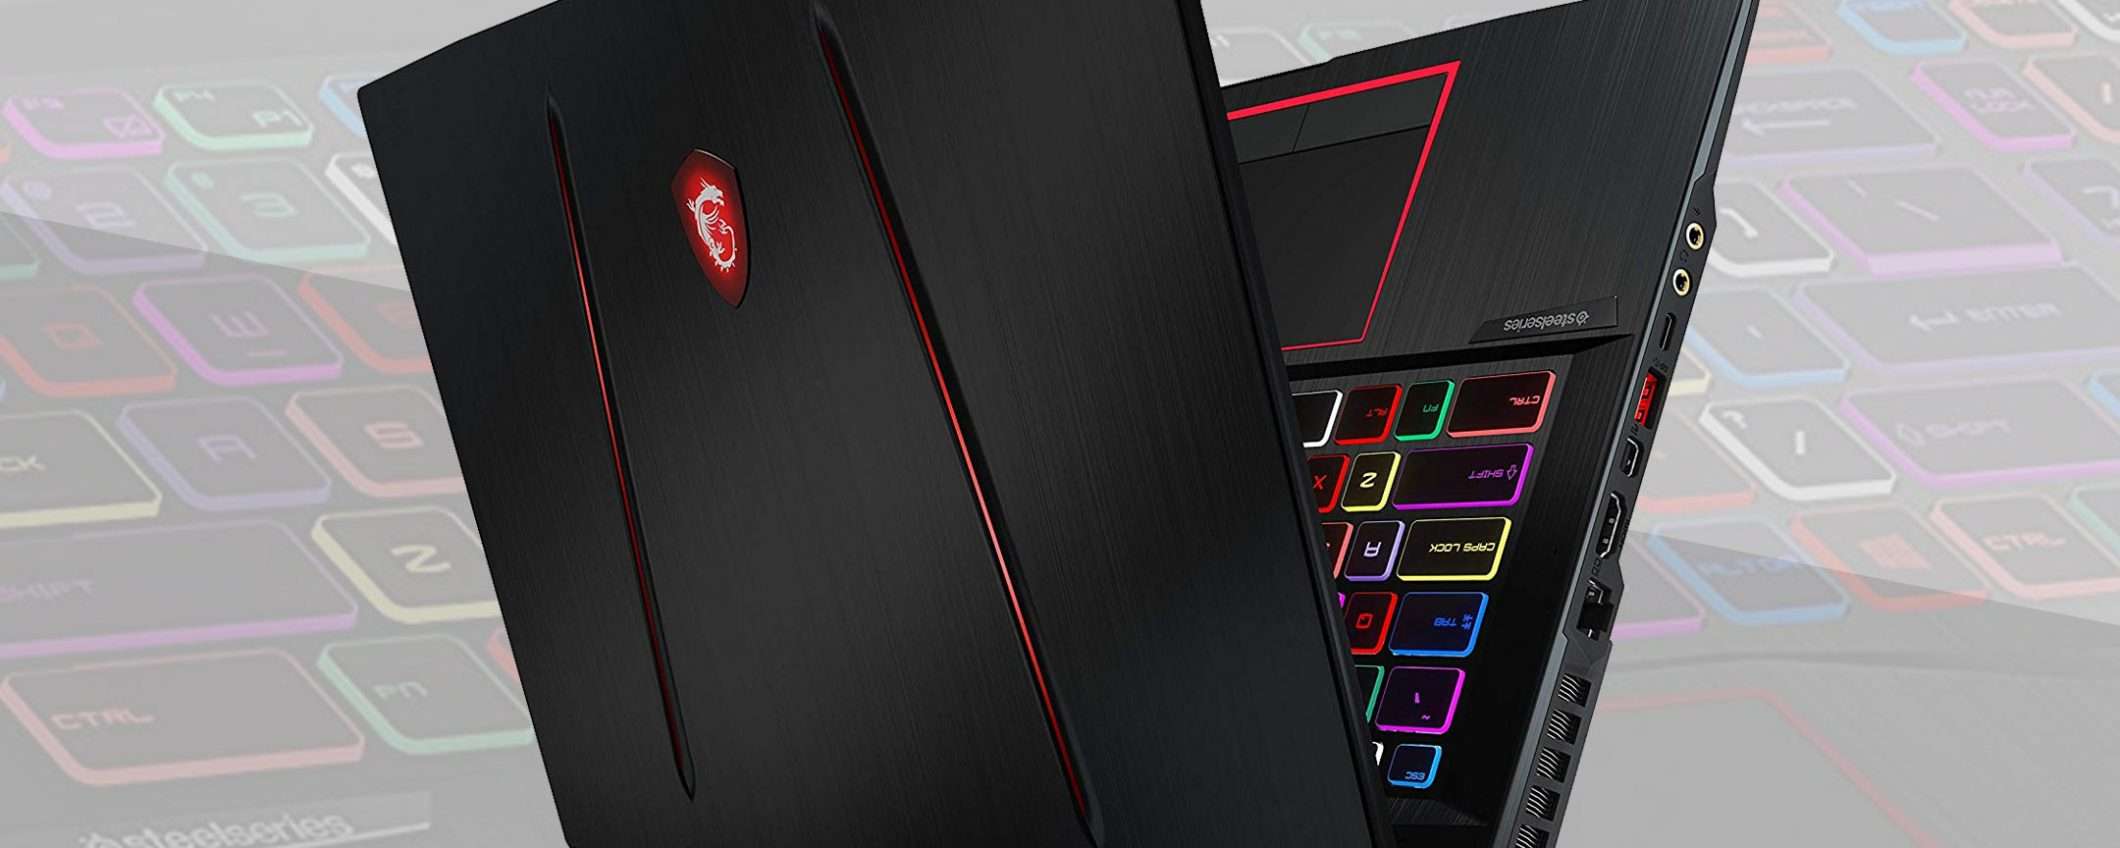 Il notebook gaming MSI in sconto nel Black Friday